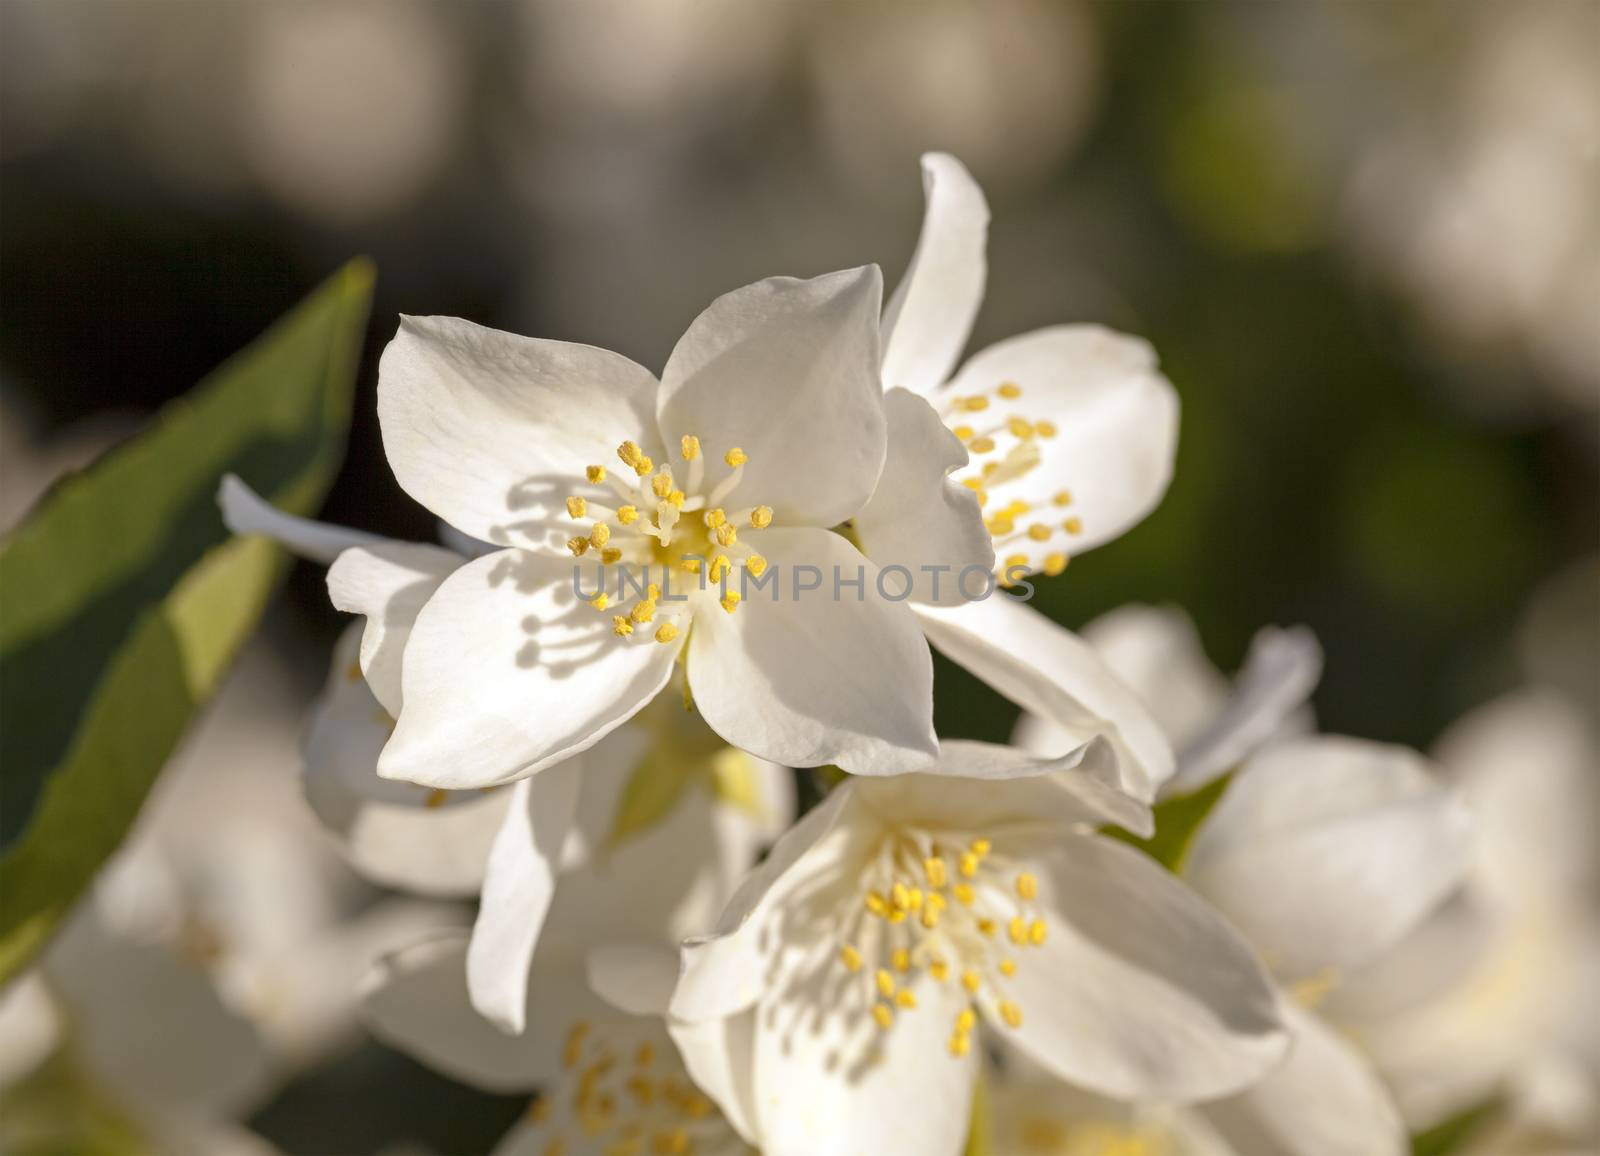   the flowers of a white jasmine photographed by a close up. small depth of sharpness